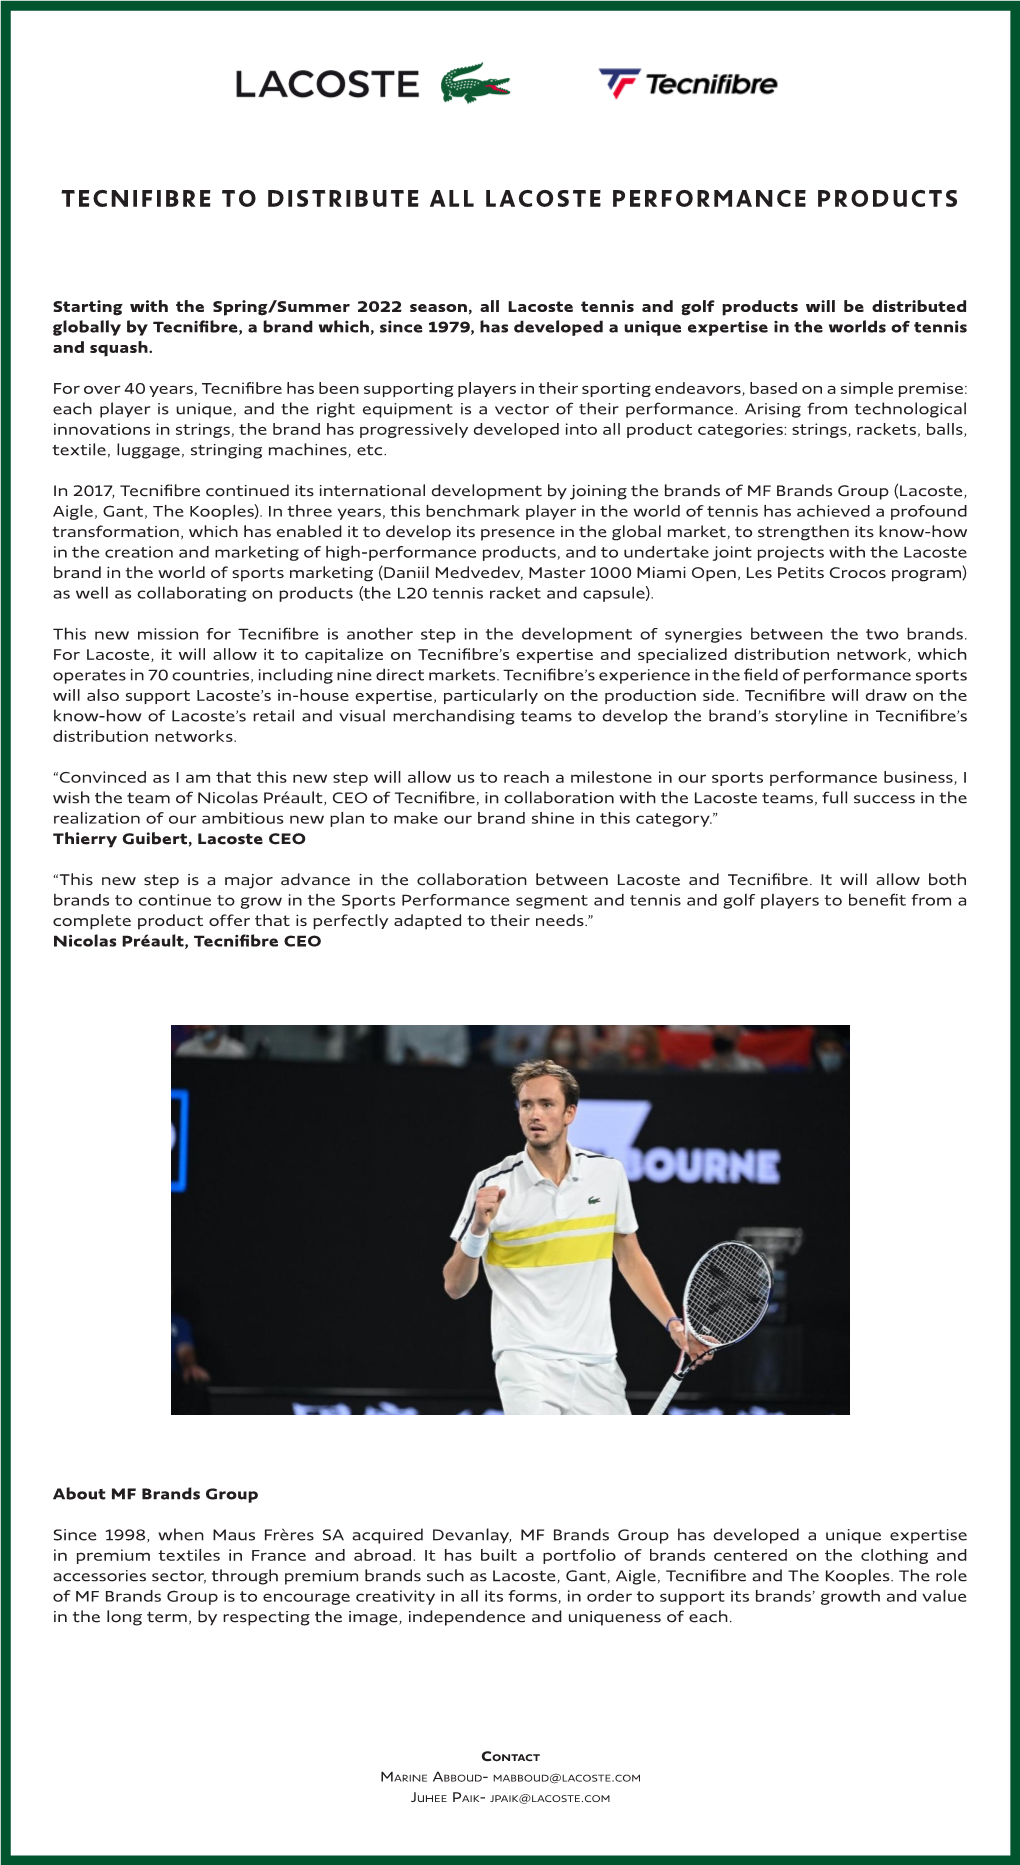 Tecnifibre to Distribute All Lacoste Performance Products